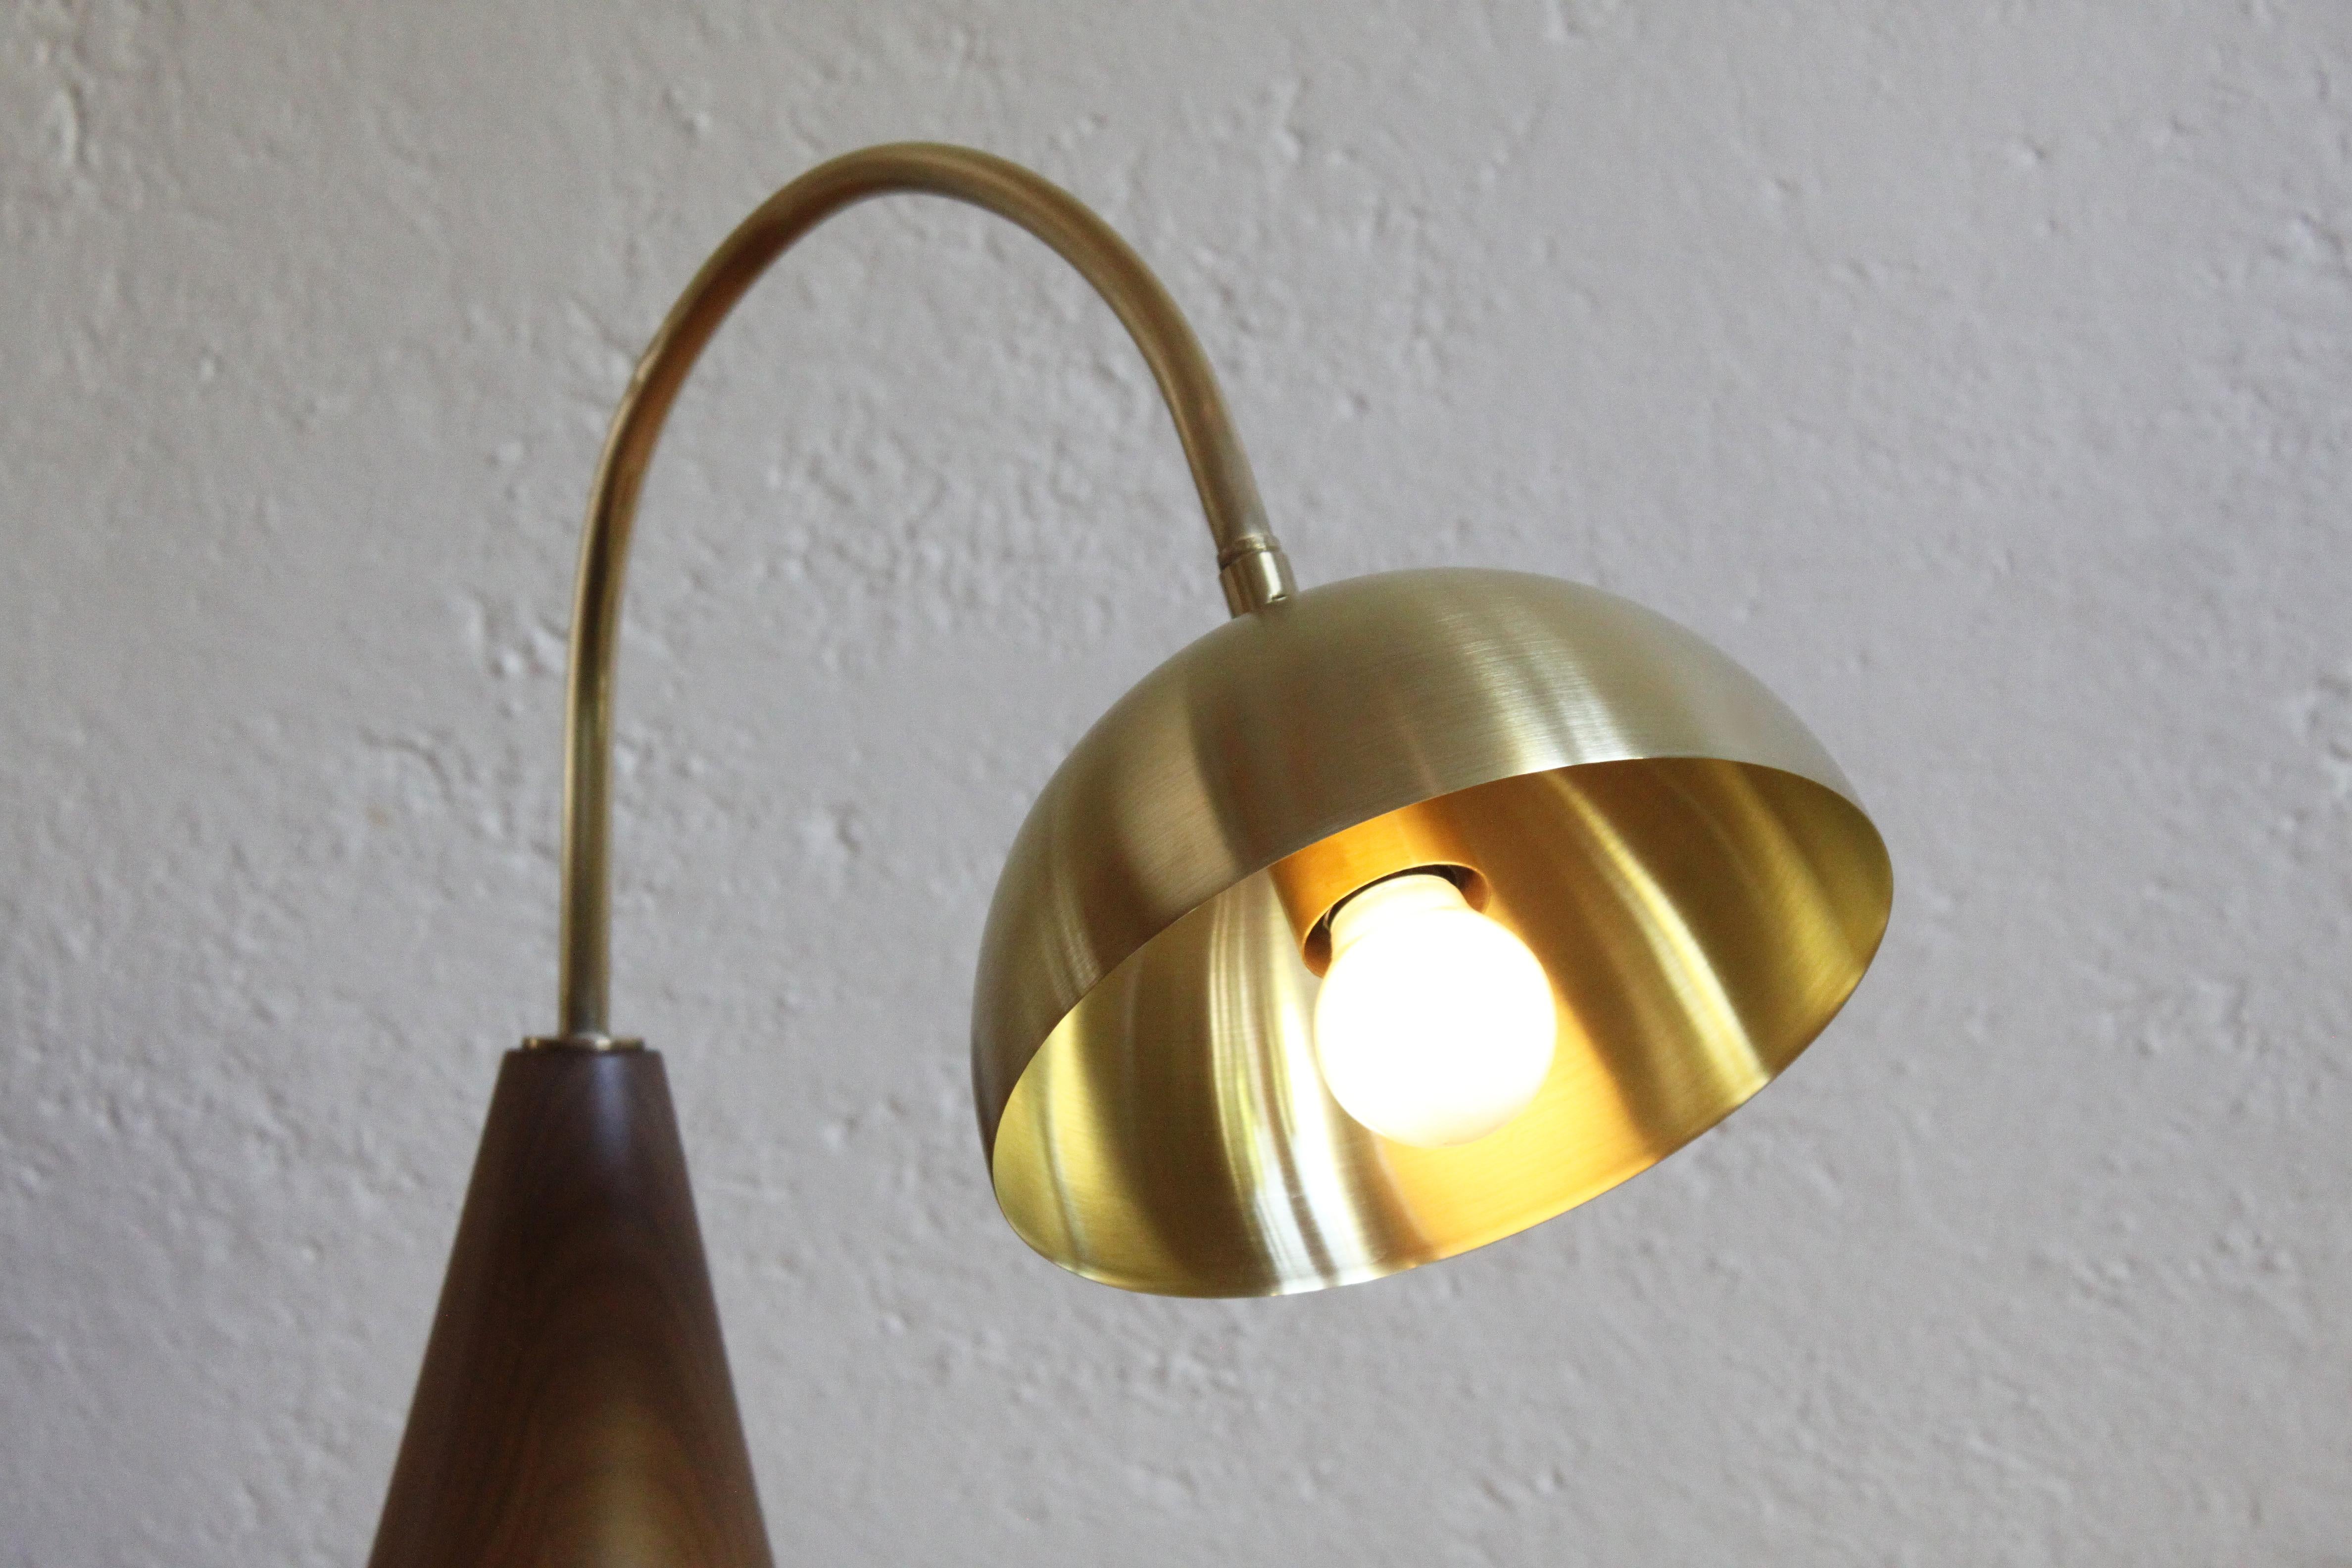 Steel Arco De Mesa Table Lamp by Maria Beckmann, Represented by Tuleste Factory